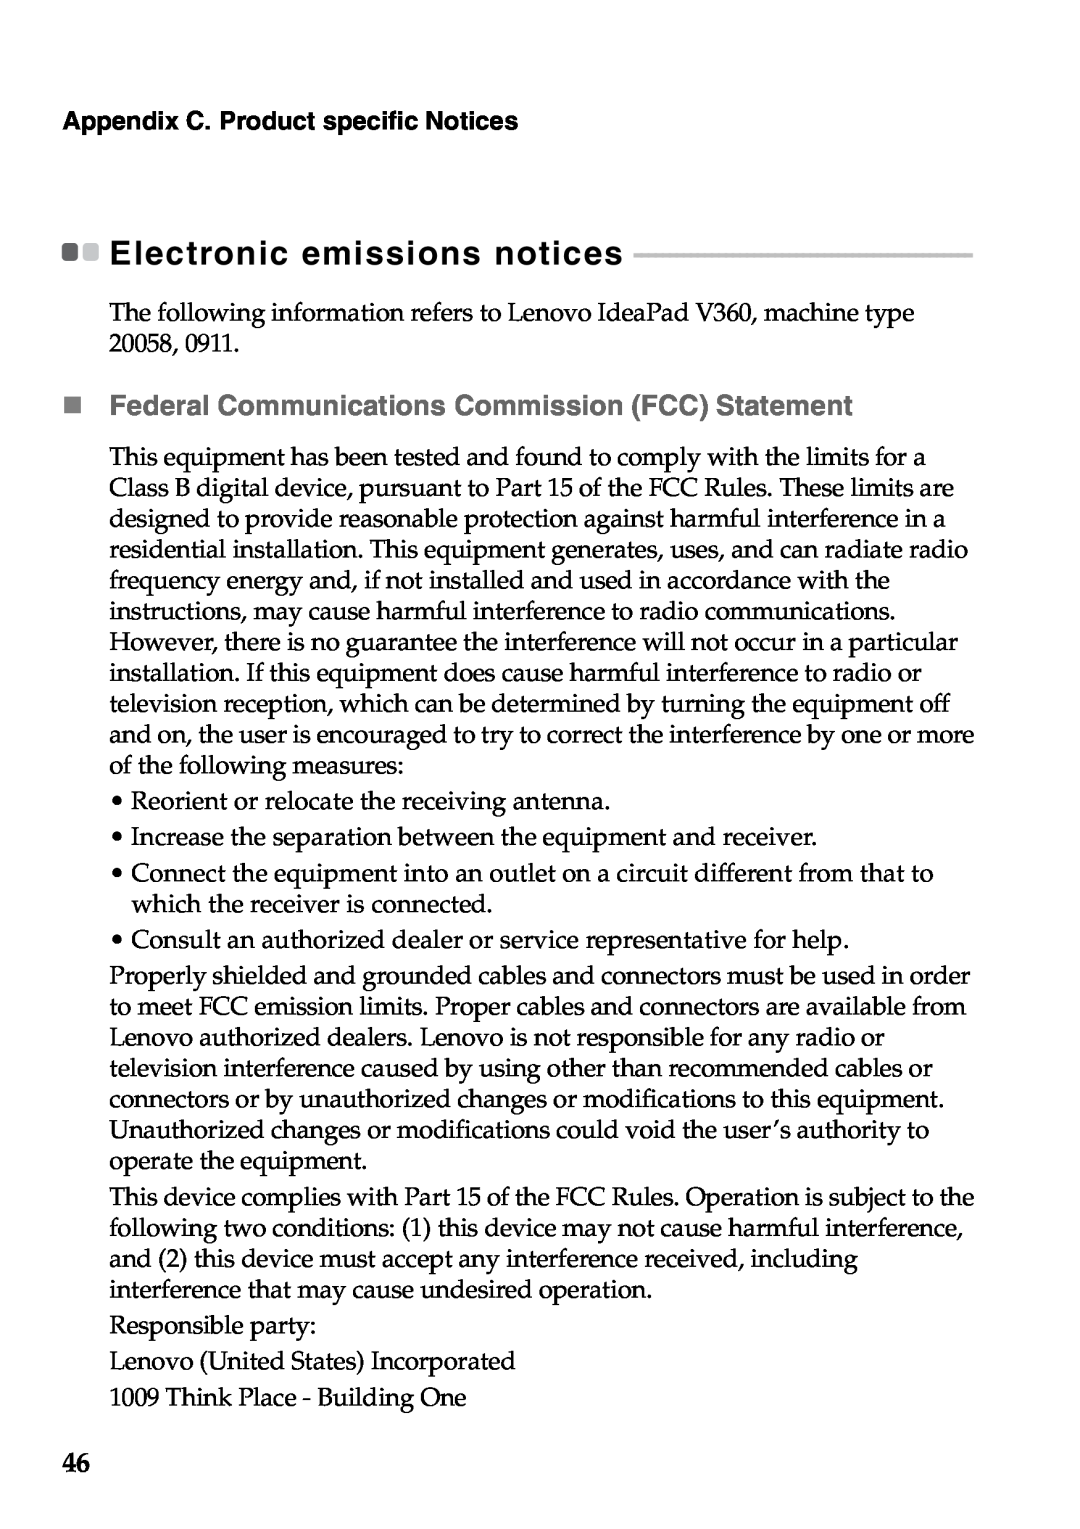 Lenovo V360 manual Electronic emissions notices, „ Federal Communications Commission FCC Statement 